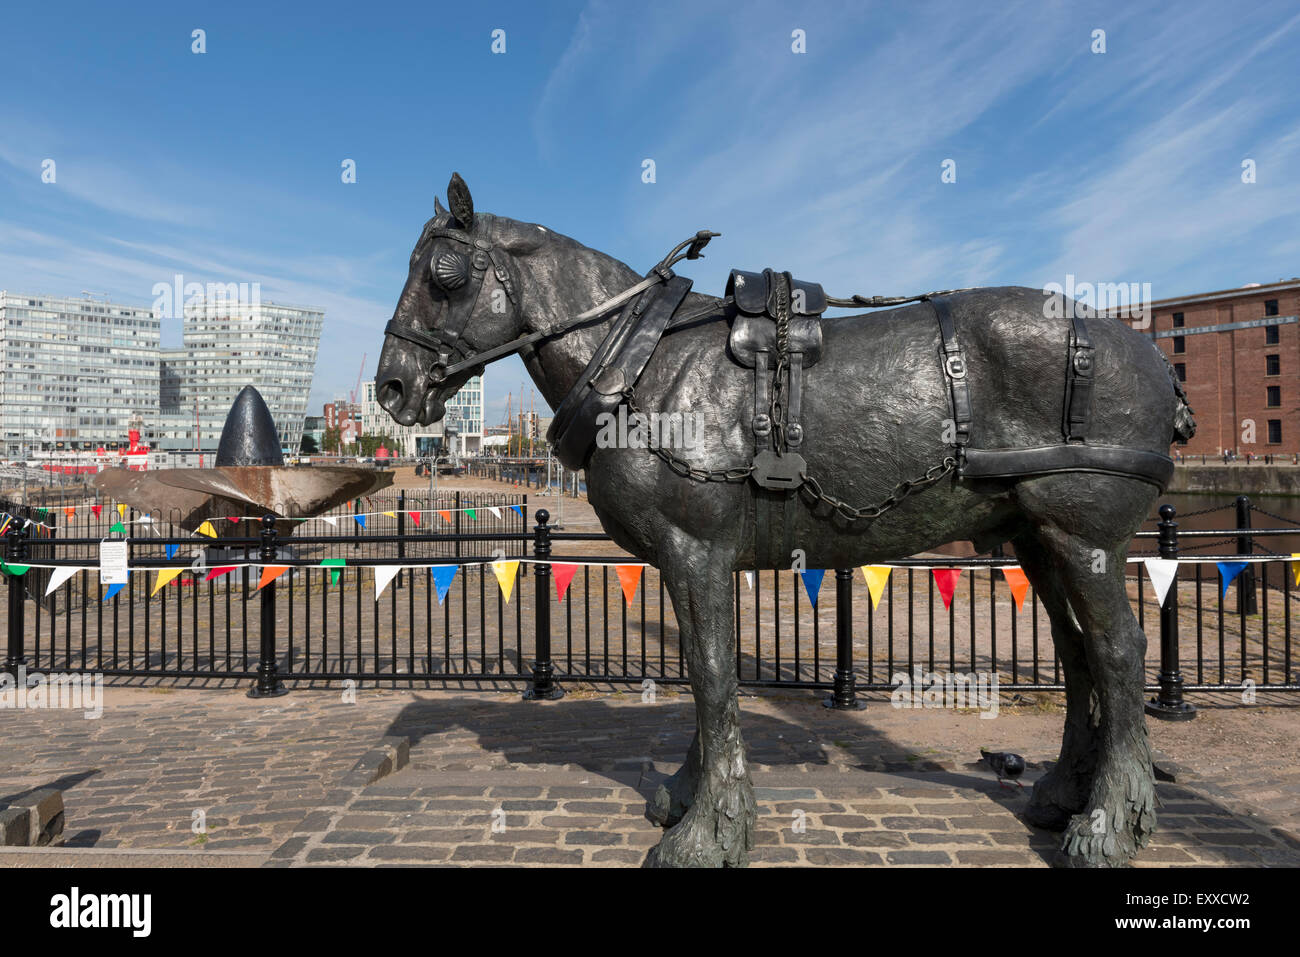 Memorial to the dock horses, with propeller of the ill-fated RMS Lusitania, Mann Island district, Liverpool Albert docks, North of England, UK Stock Photo